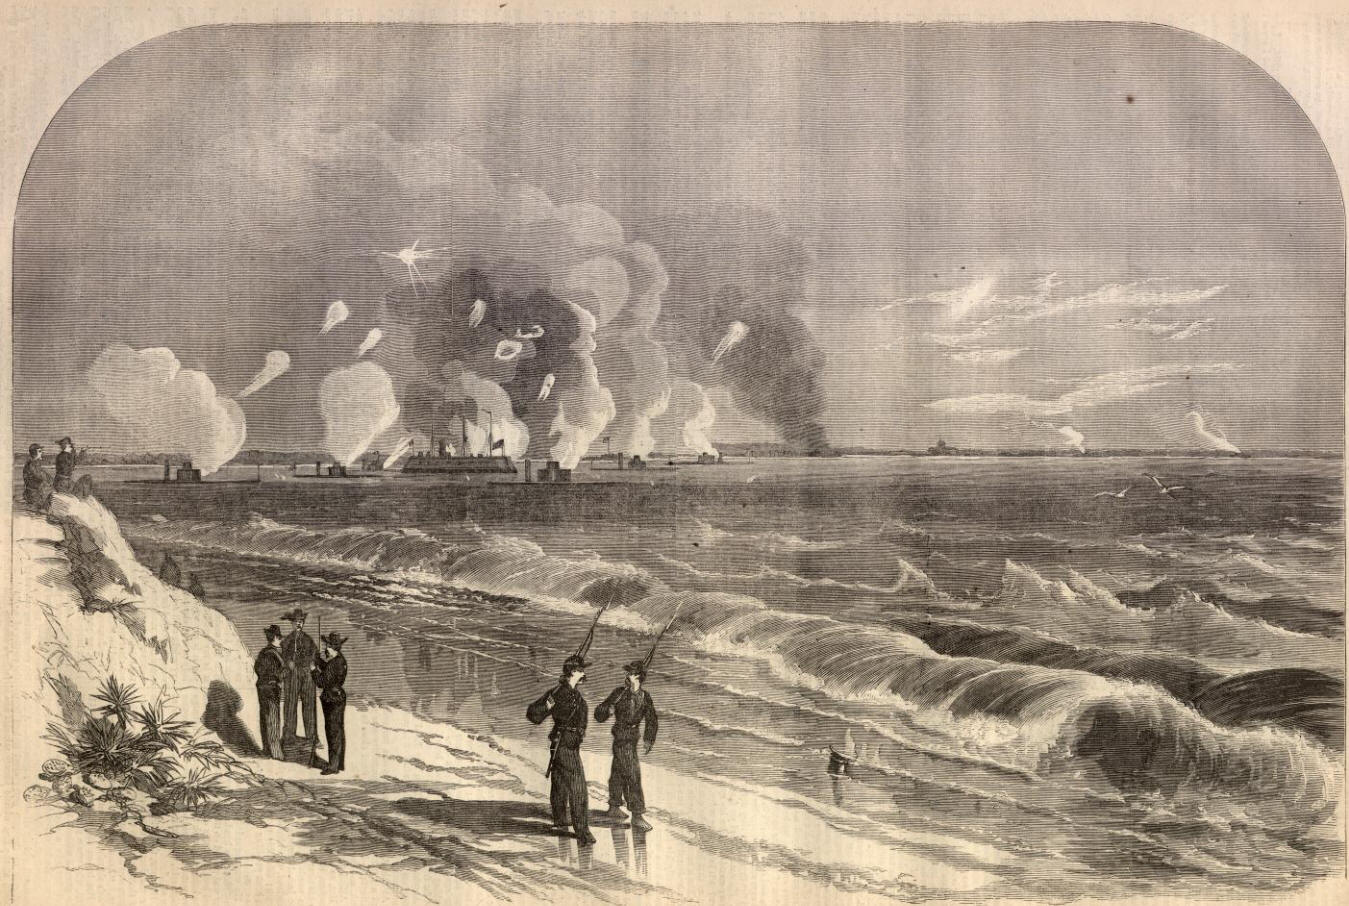 Bombardment of Fort Moultrie